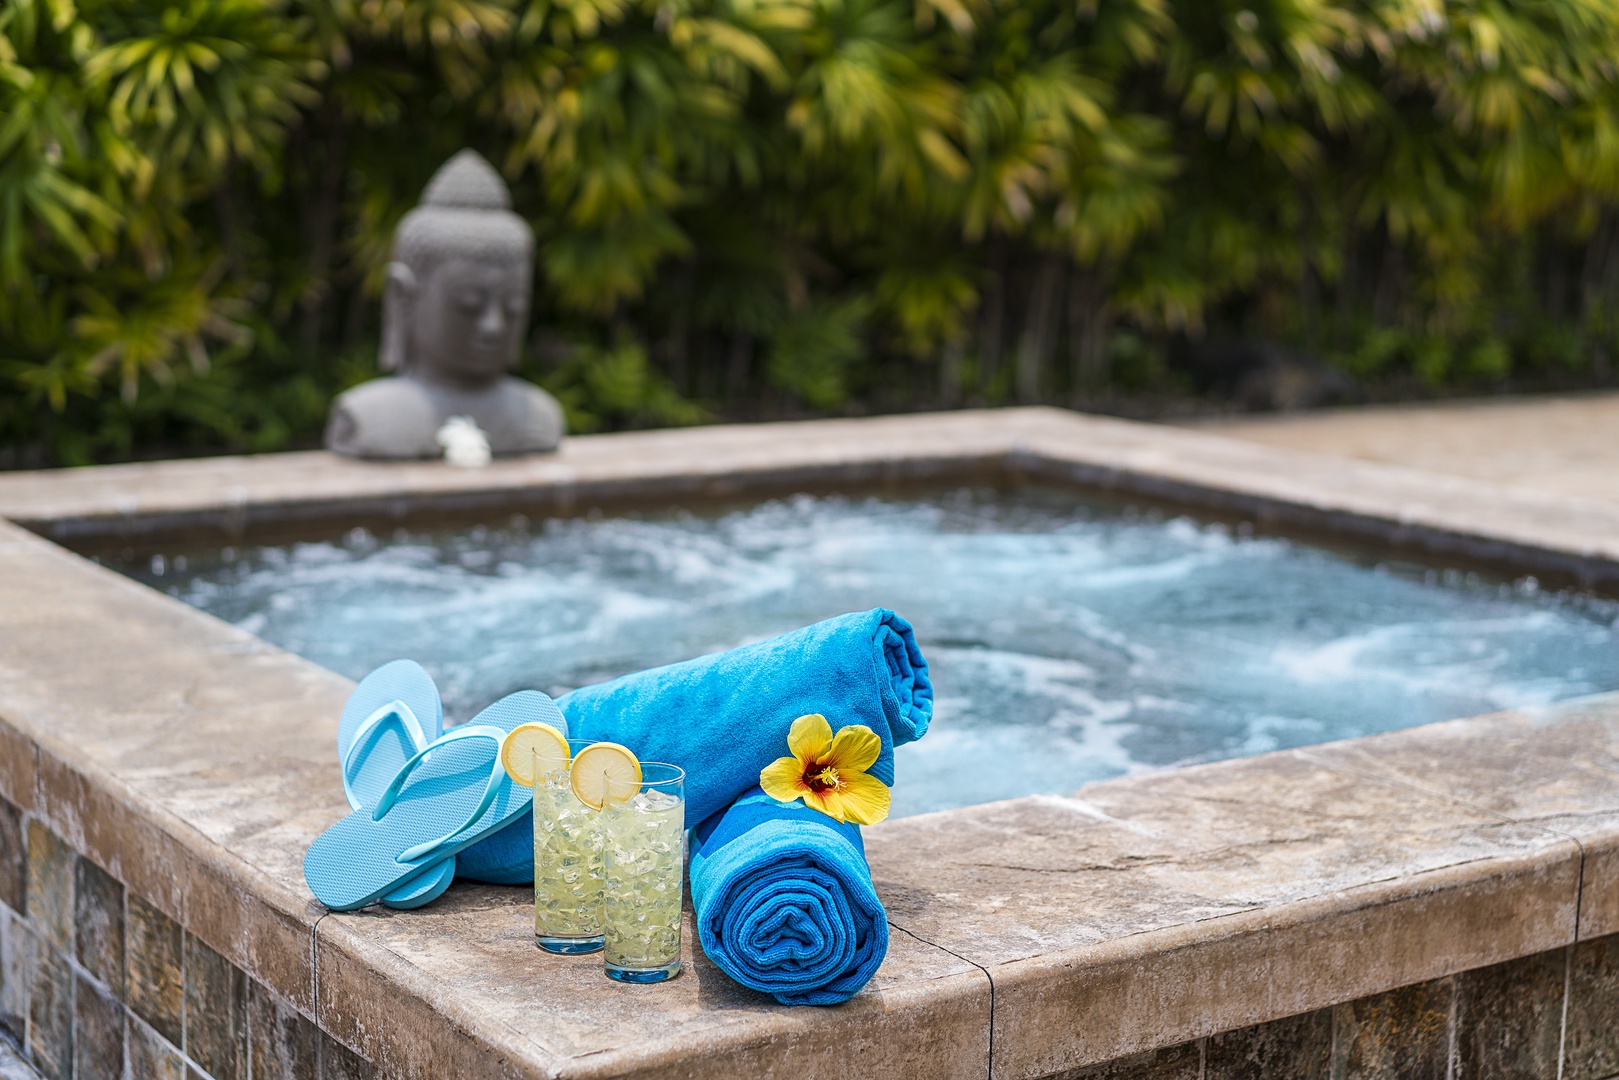 Kailua Kona Vacation Rentals, Sunset Hale - Relax and let your troubles melt away in the spa!